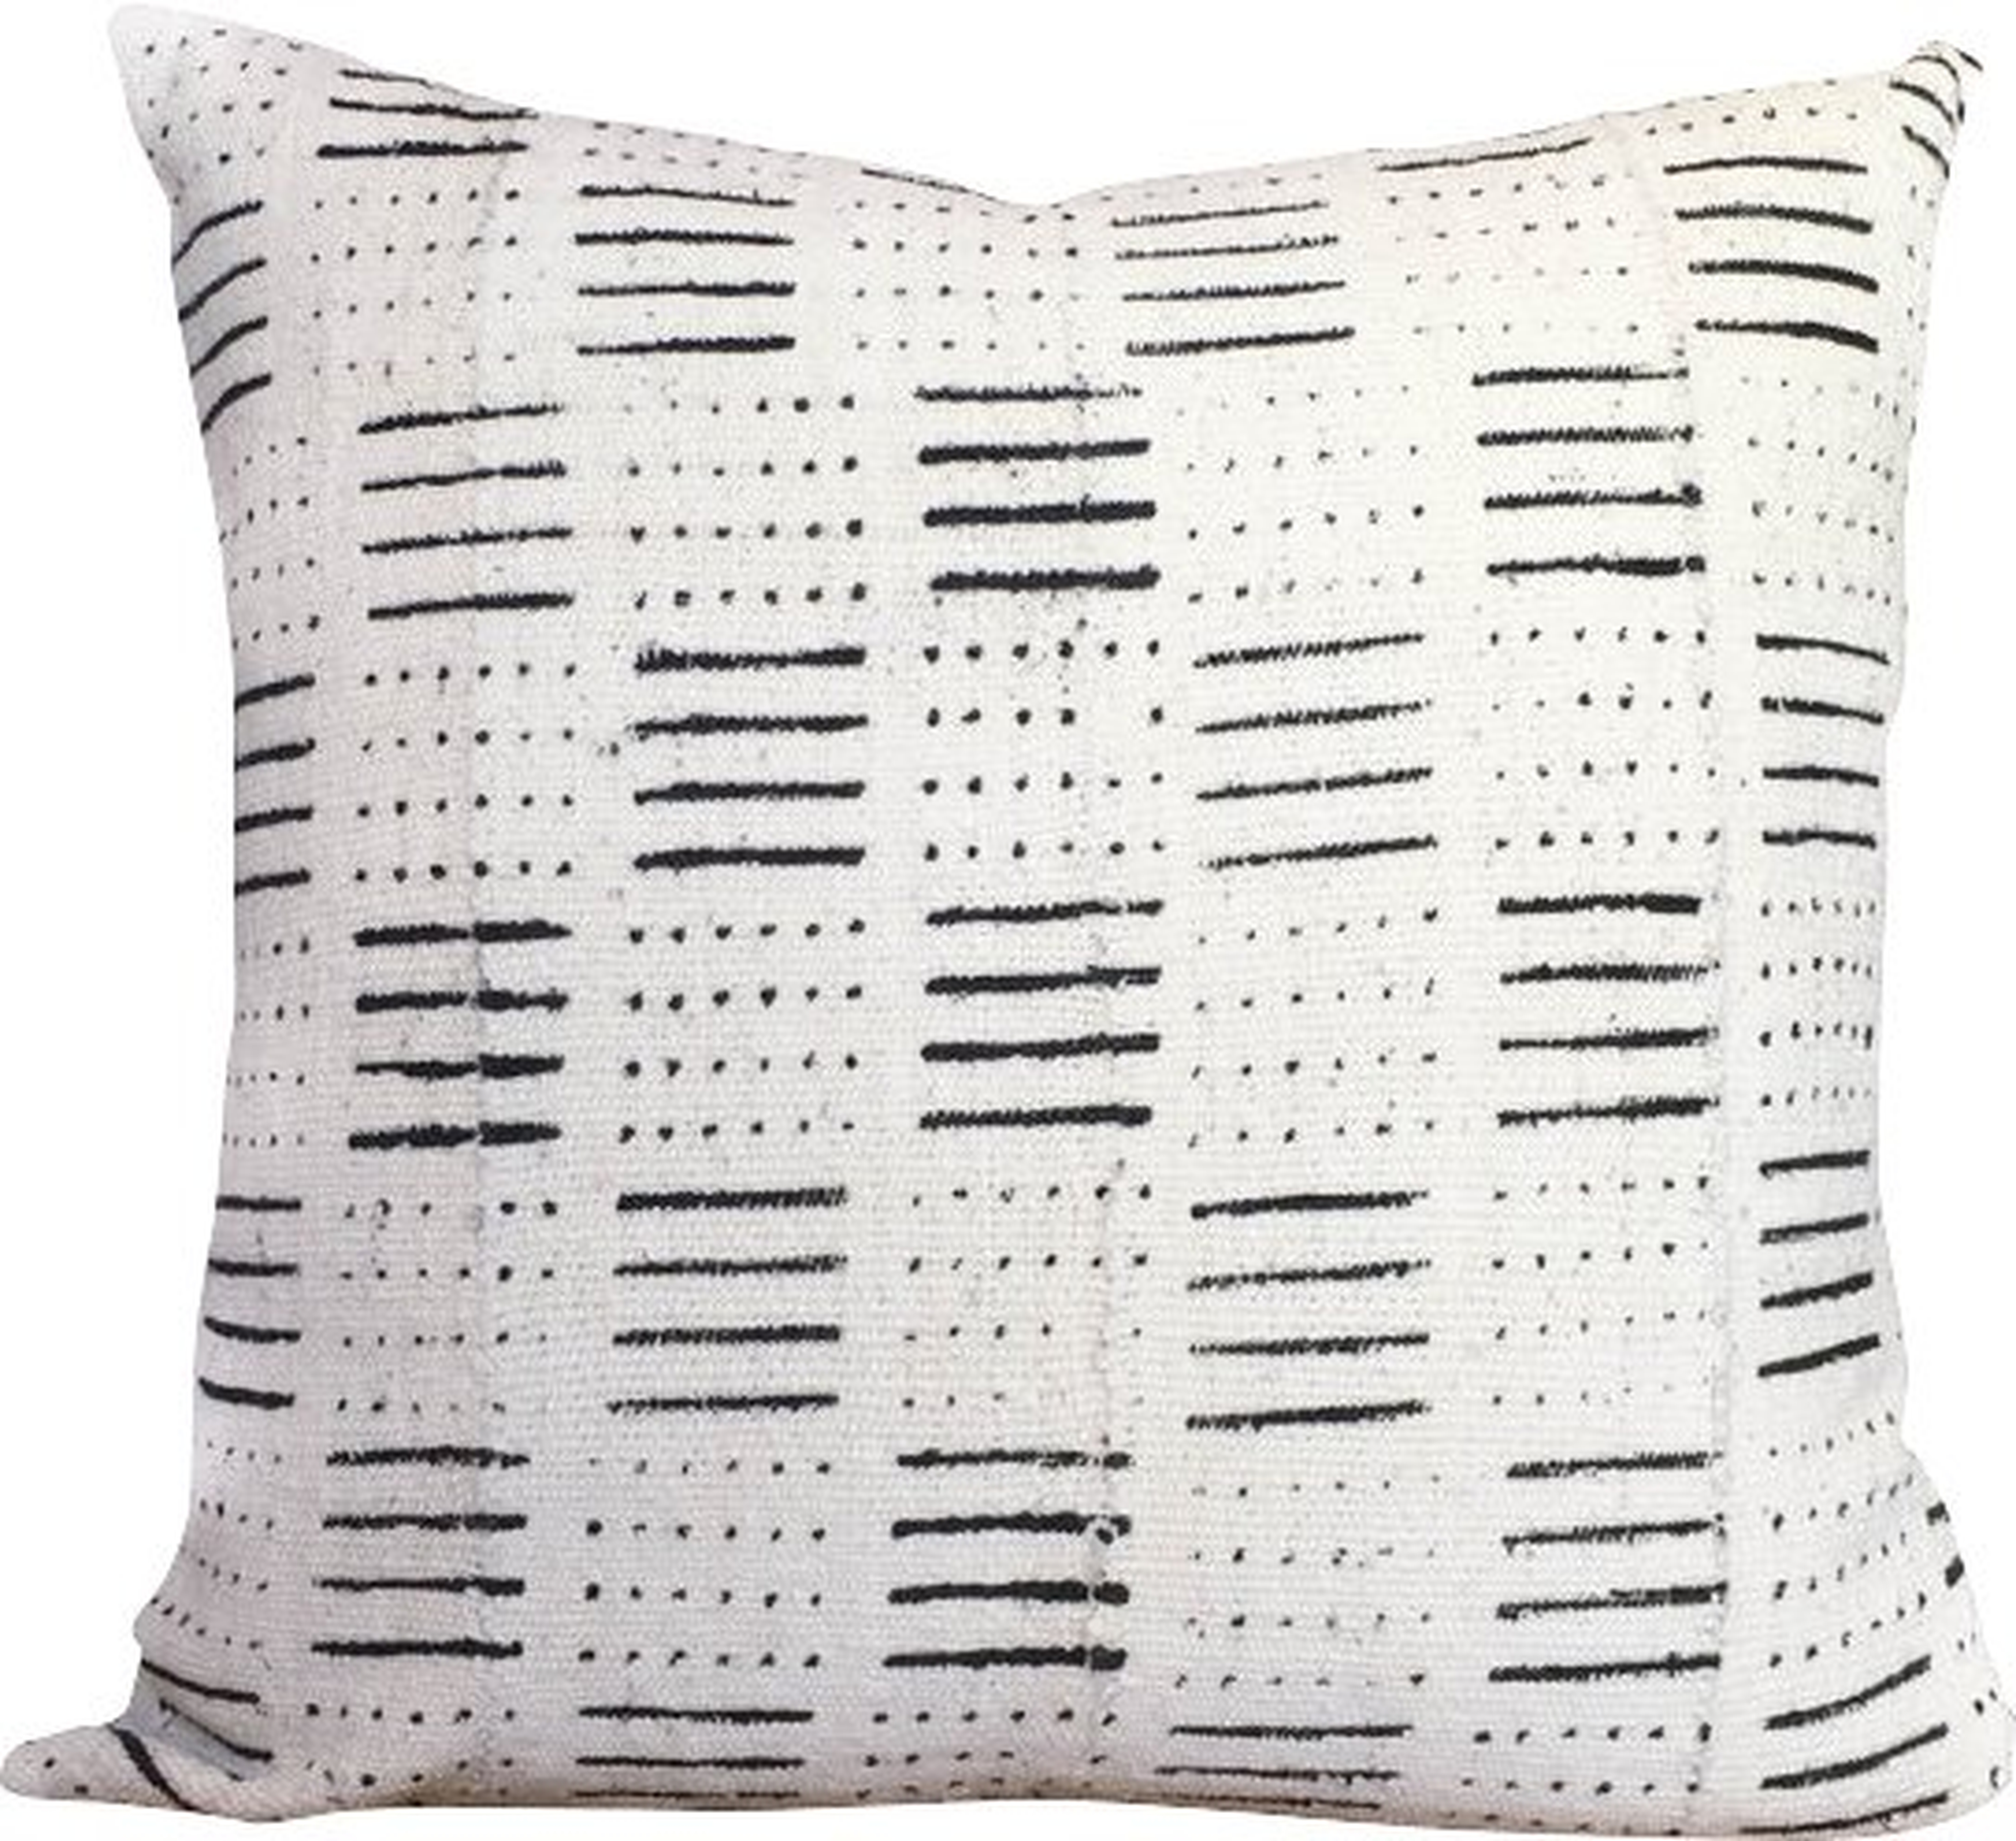 Dots and Dashes Print African Mud Cloth Pillow Cover - AllModern